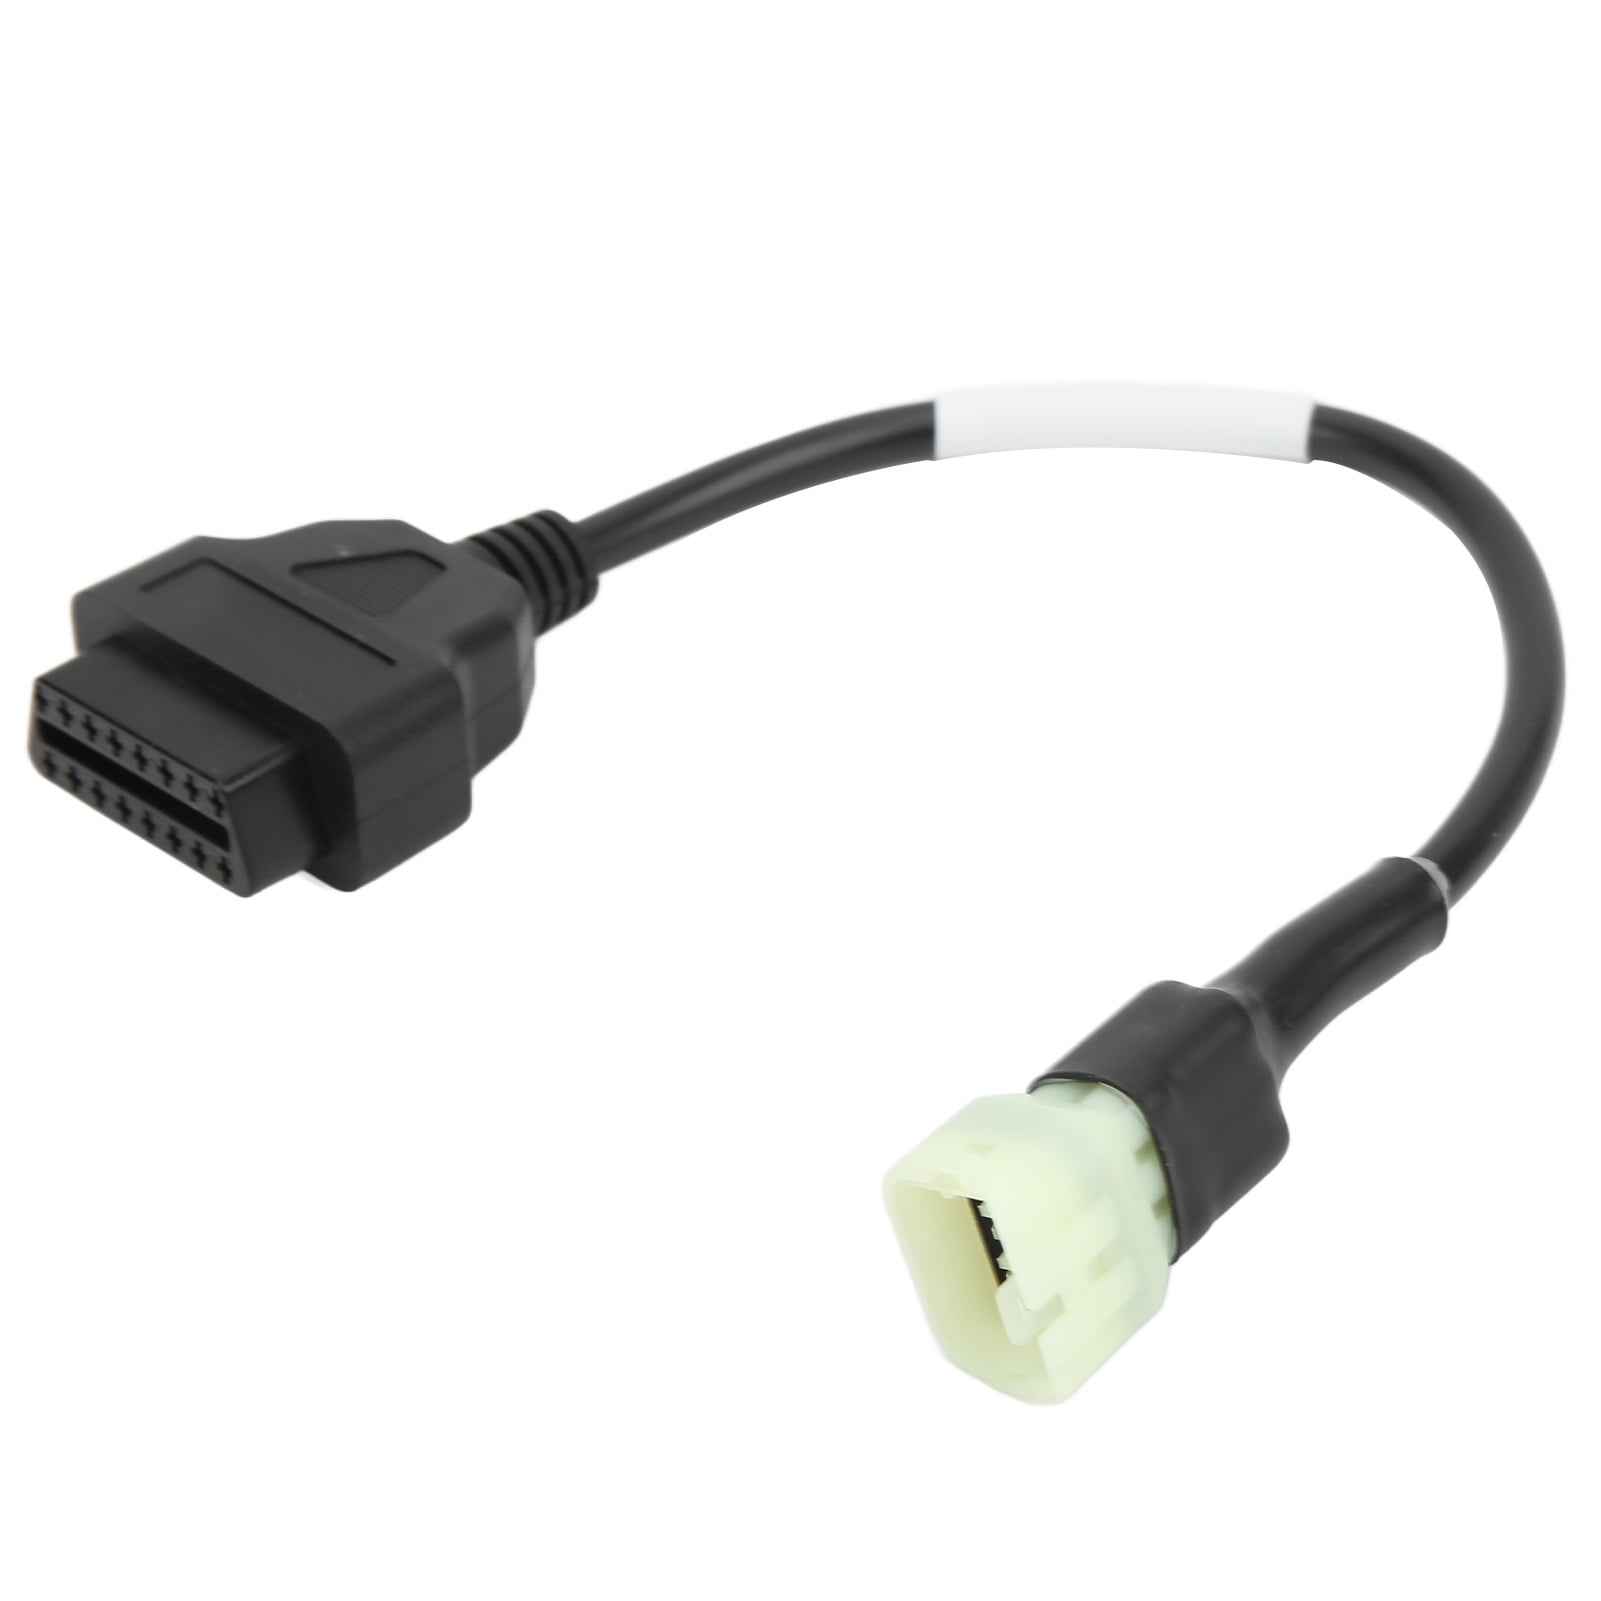 Dominerende udtryk Saml op LAFGUR OBD2 6 Pin Diagnostic Cable Conversion Adapter for Motorcycle for  Delphi ECU with Connector,OBD2 6 Pin Scanner Cable,OBD2 6 Pin Diagnostic  Connector - Walmart.com